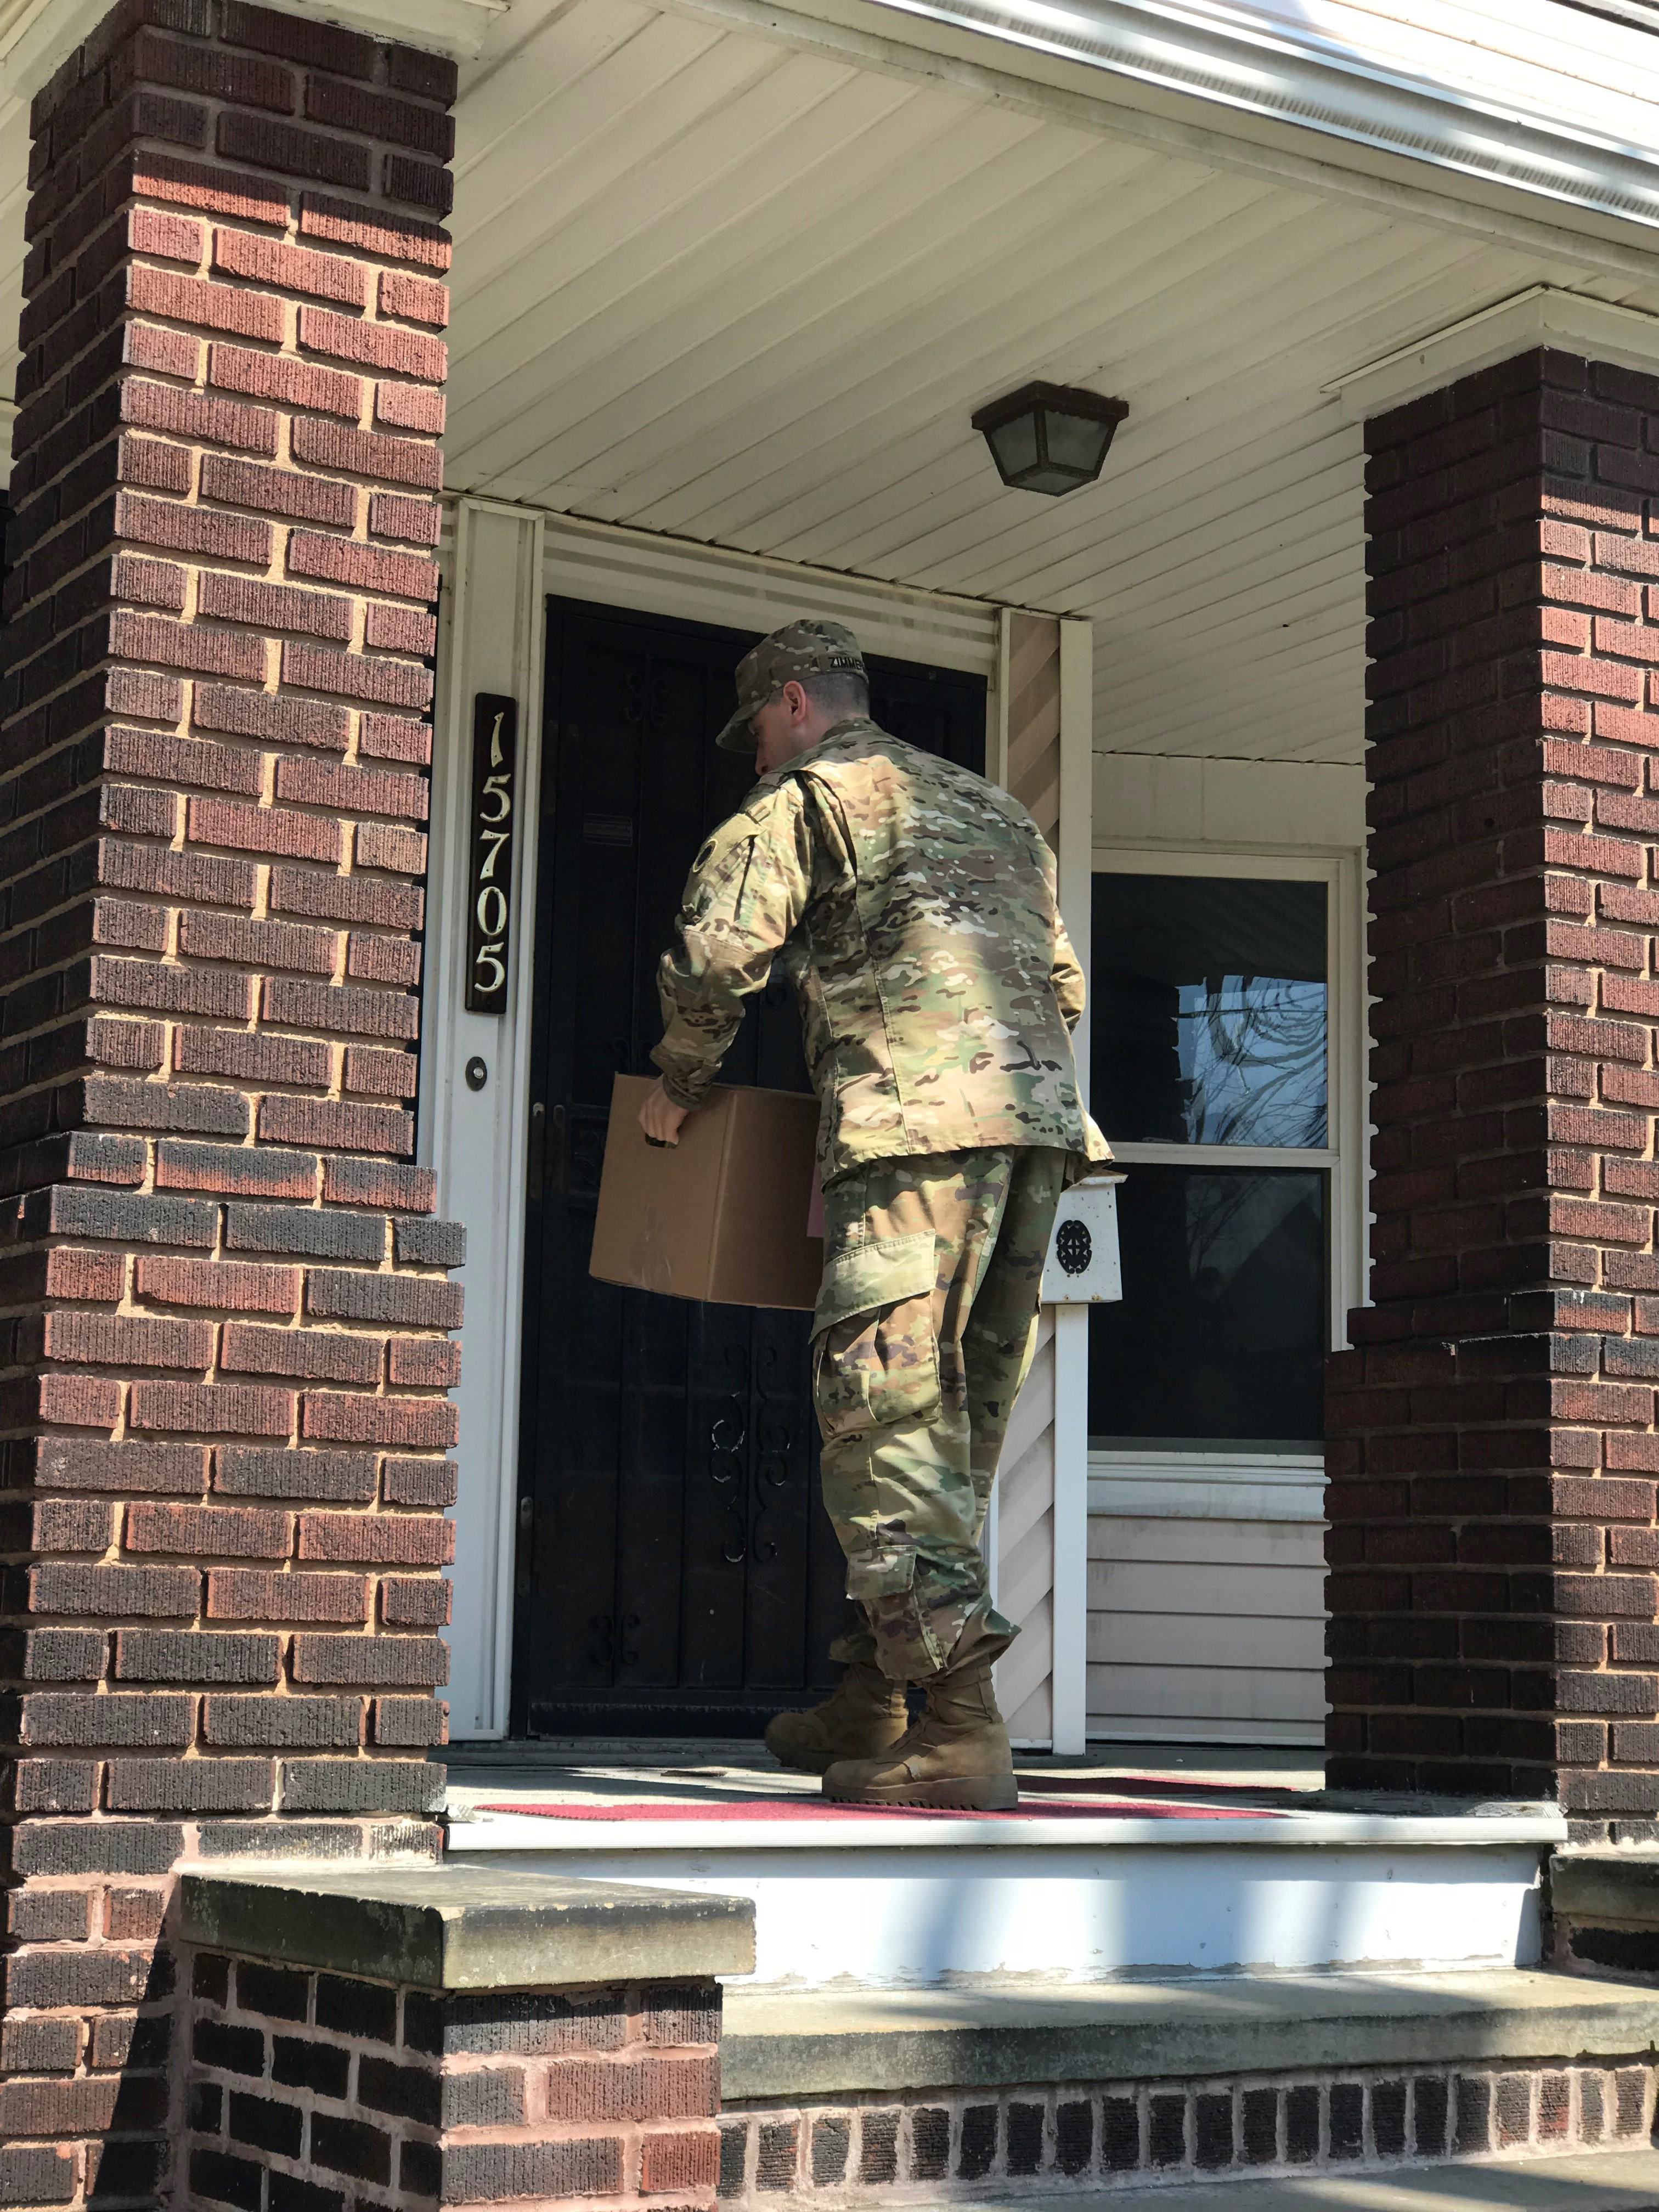 Soliderdelivers groceries to porch.